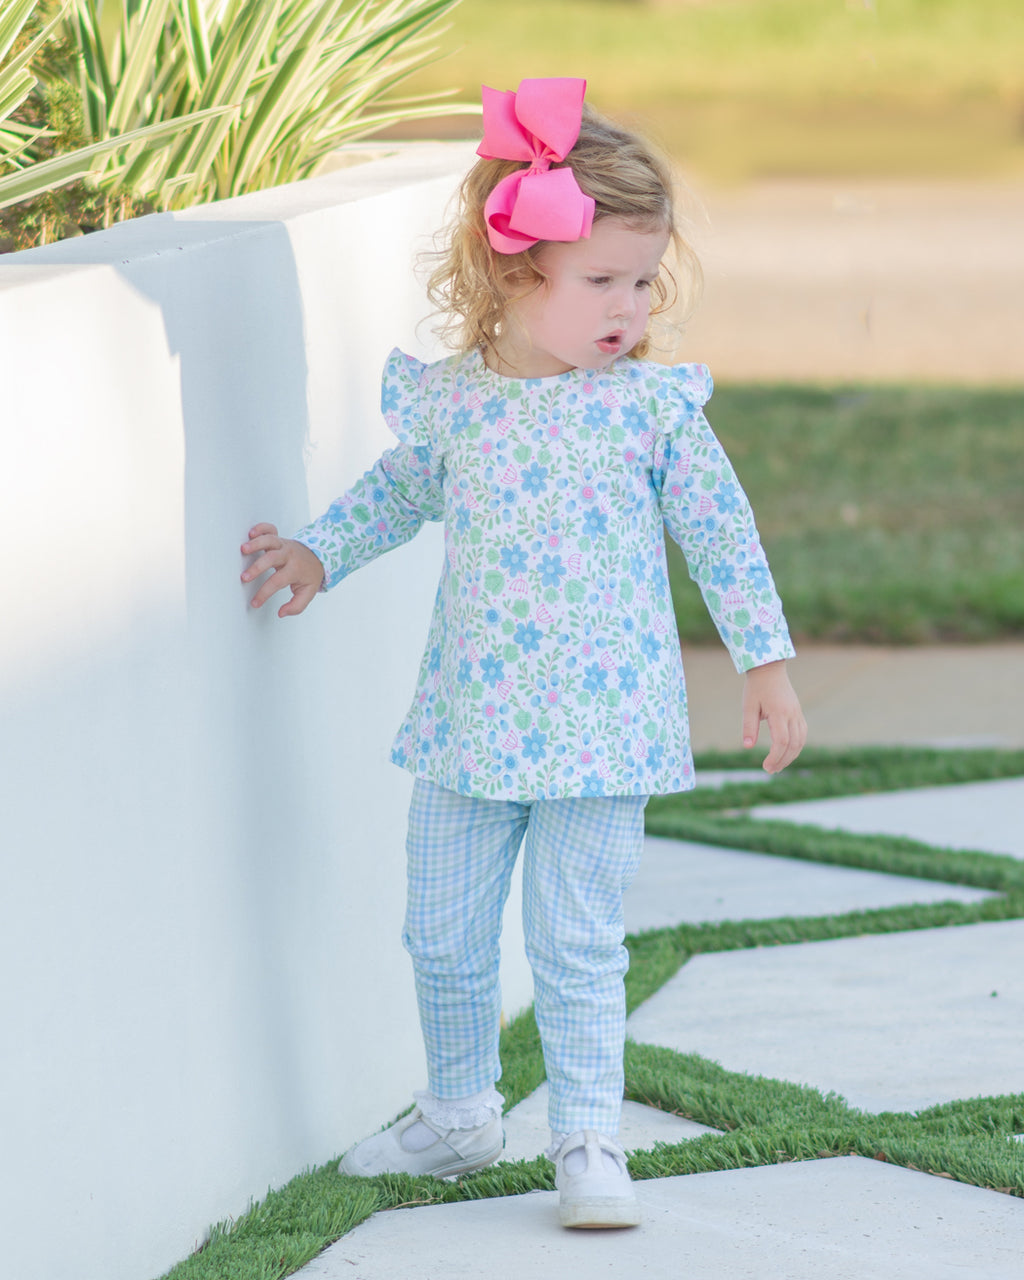 Buy Pima Baby Girl Smocked Clothes - Little Threads Inc. Children's Clothing